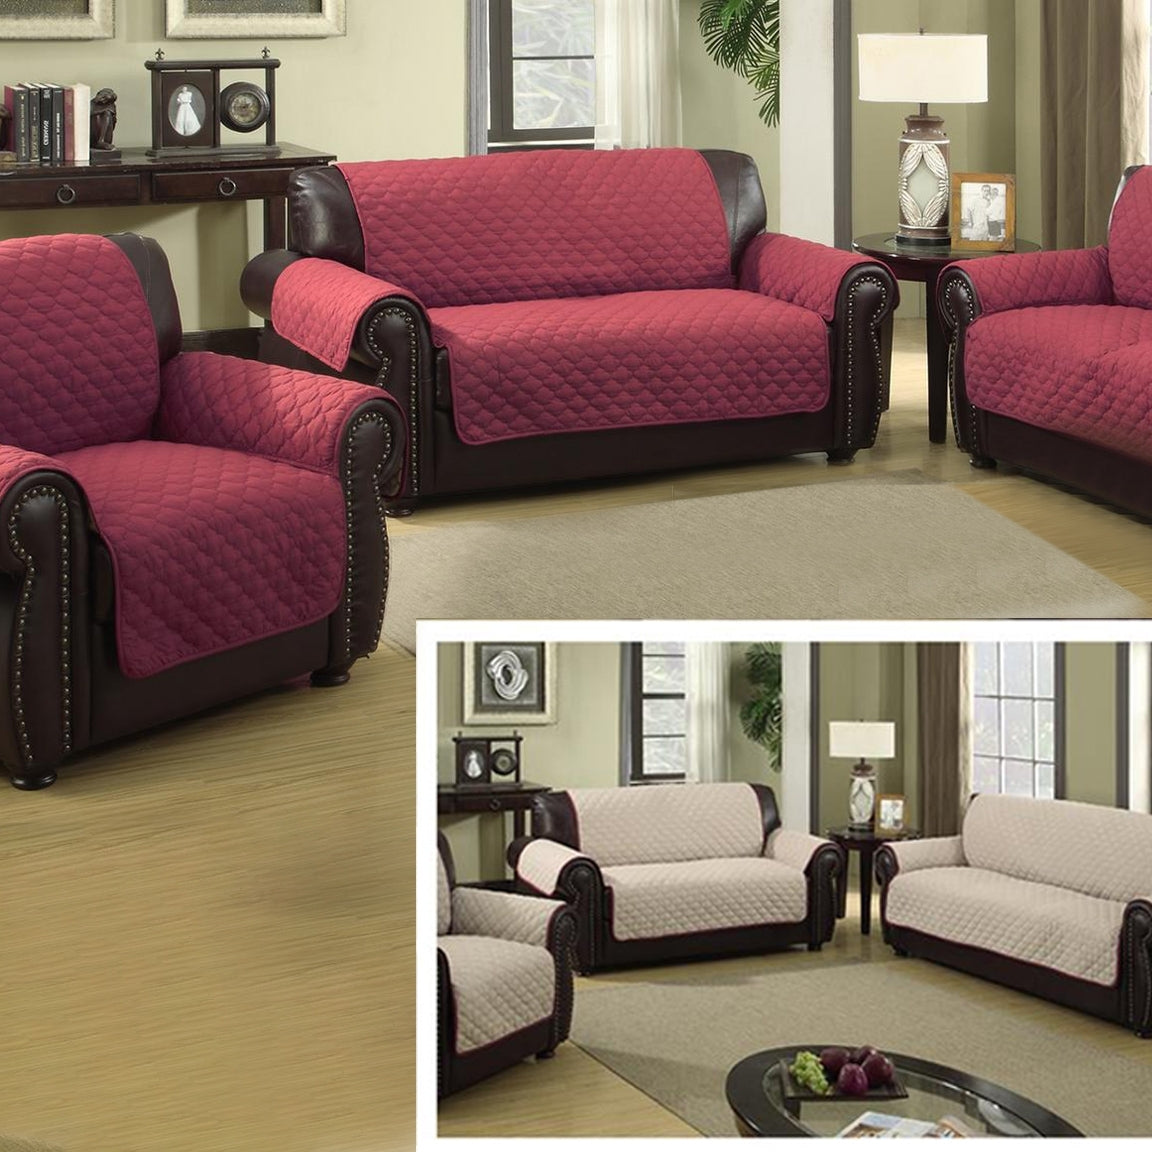 Waterproof Quilted Reversible Furniture Slipcover for Chair, Loveseat, or Sofa / Garnet/Natural